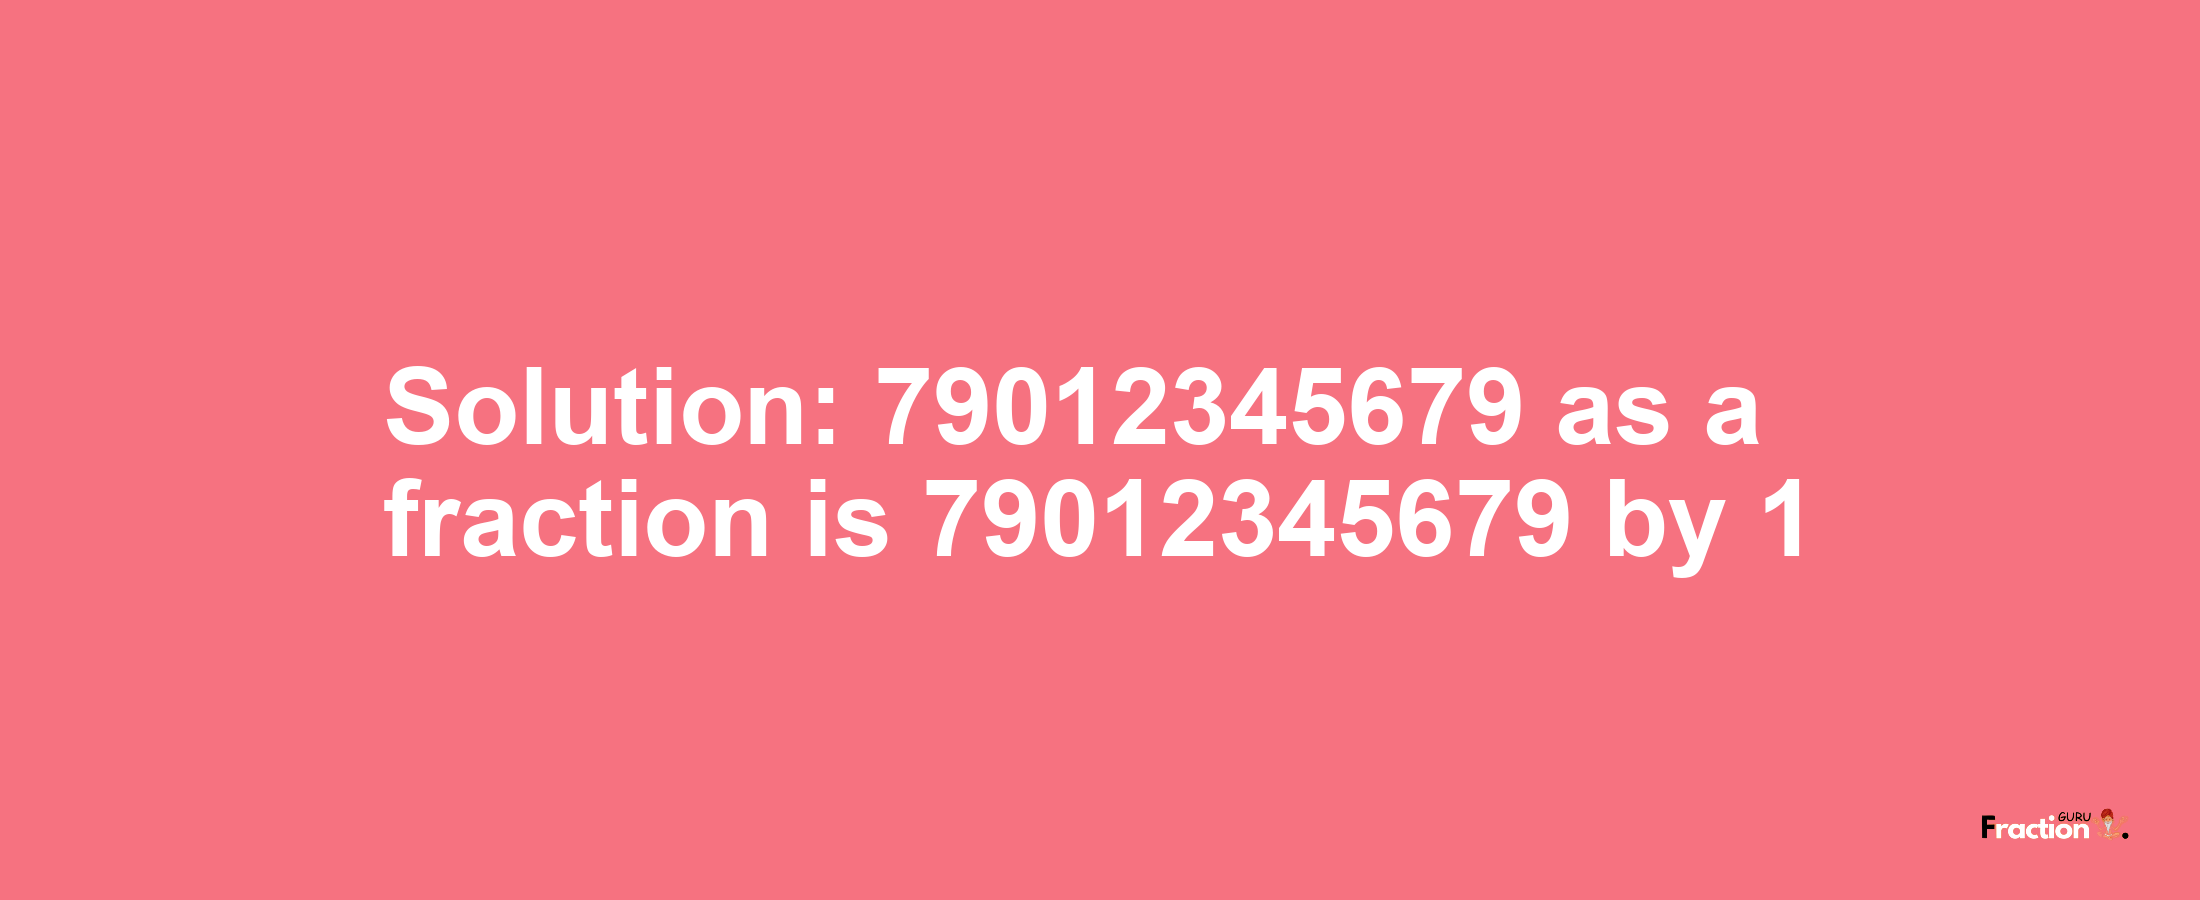 Solution:79012345679 as a fraction is 79012345679/1